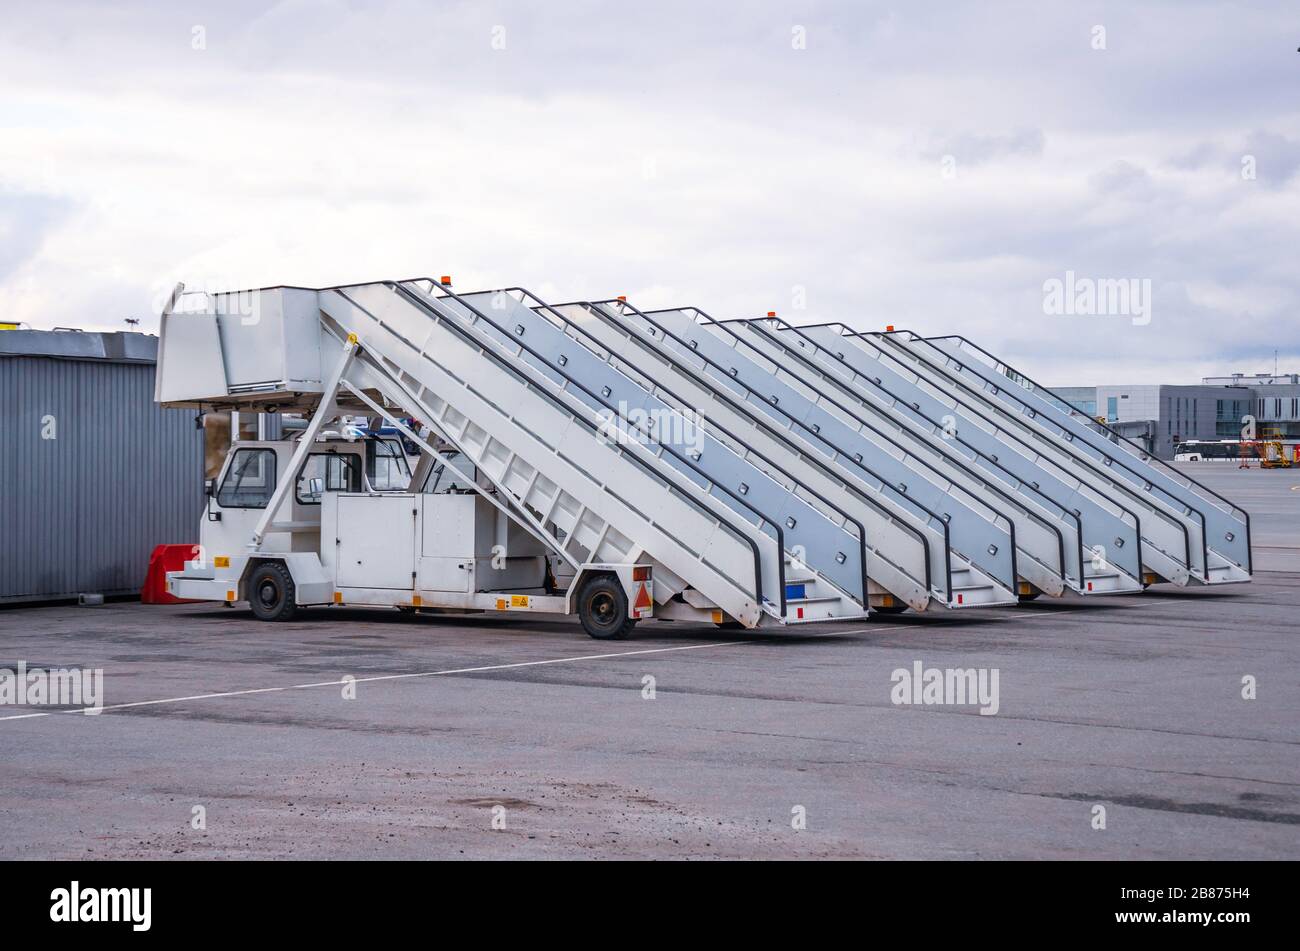 A row of gangways for boarding and alighting passengers from an airplane parked at the airport Stock Photo